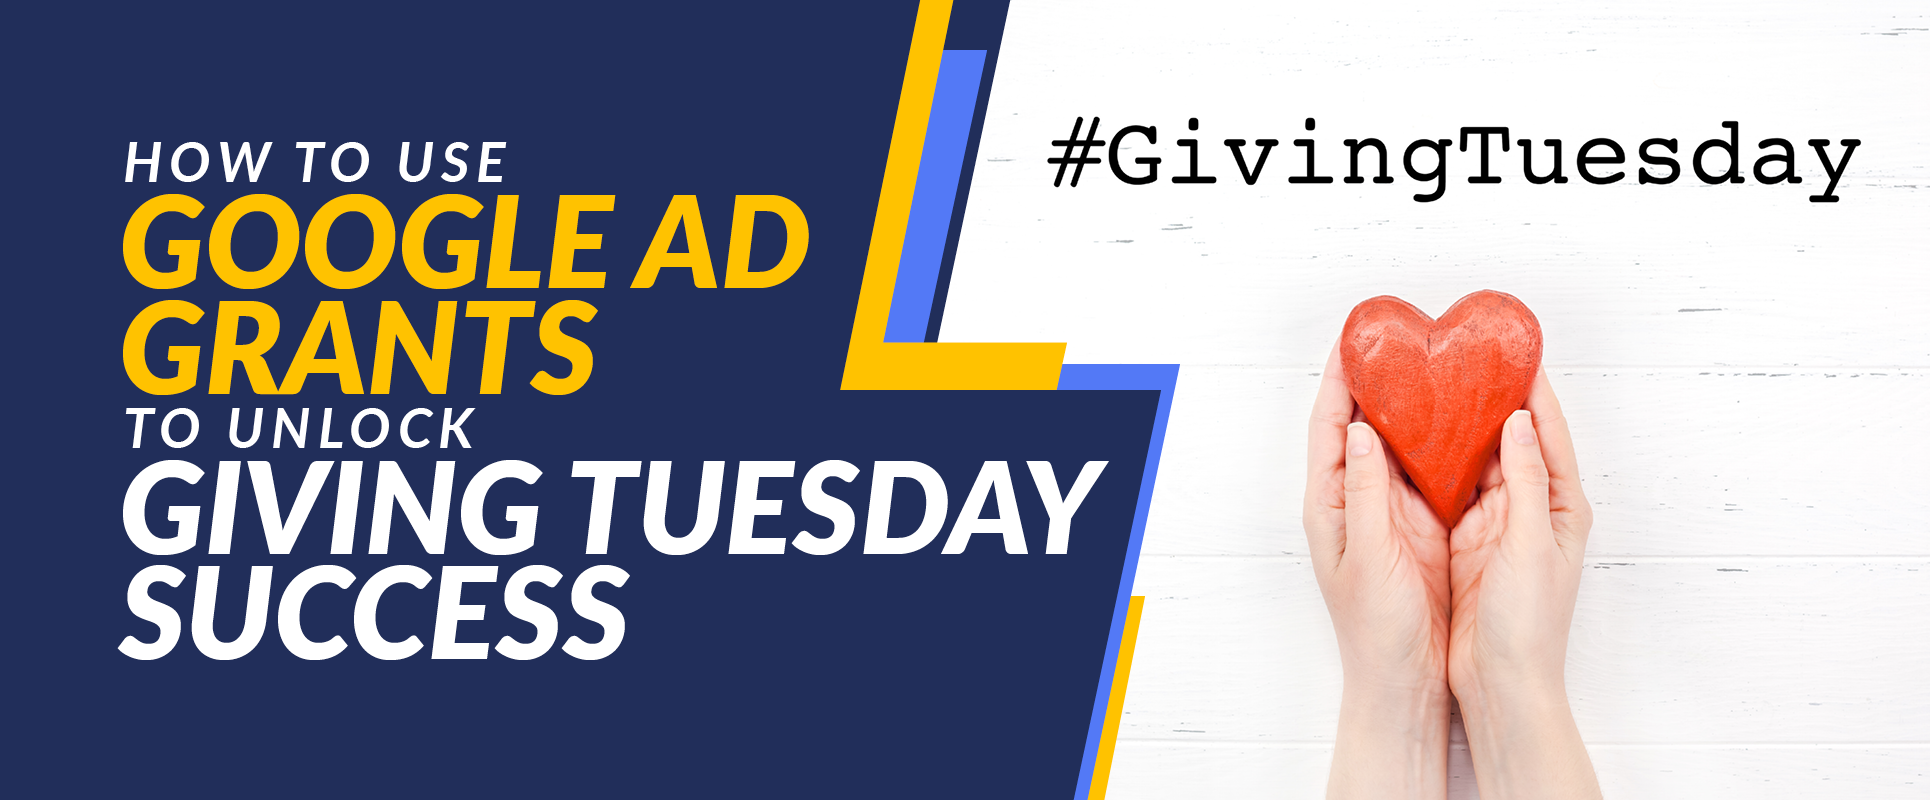  This guide shares actionable tips for marketing your Giving Tuesday campaign with the Google Ad Grant.